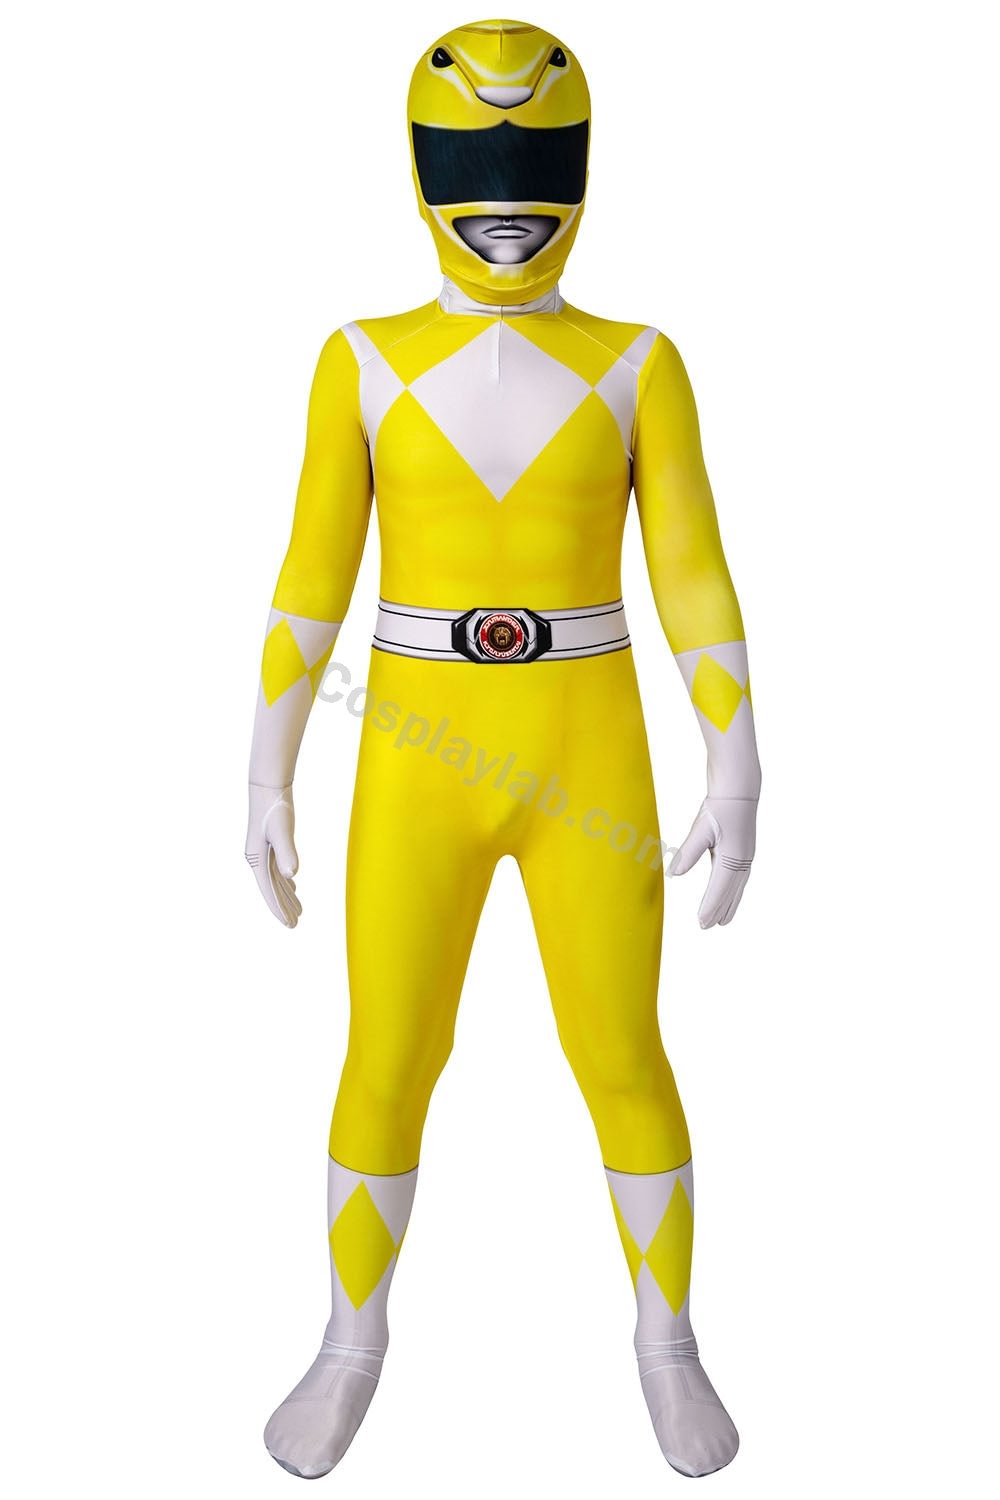 Kids Yellow Ranger Cosplay Suit 3D Spandex Costume Halloween Gifts for Children By CosplayLab